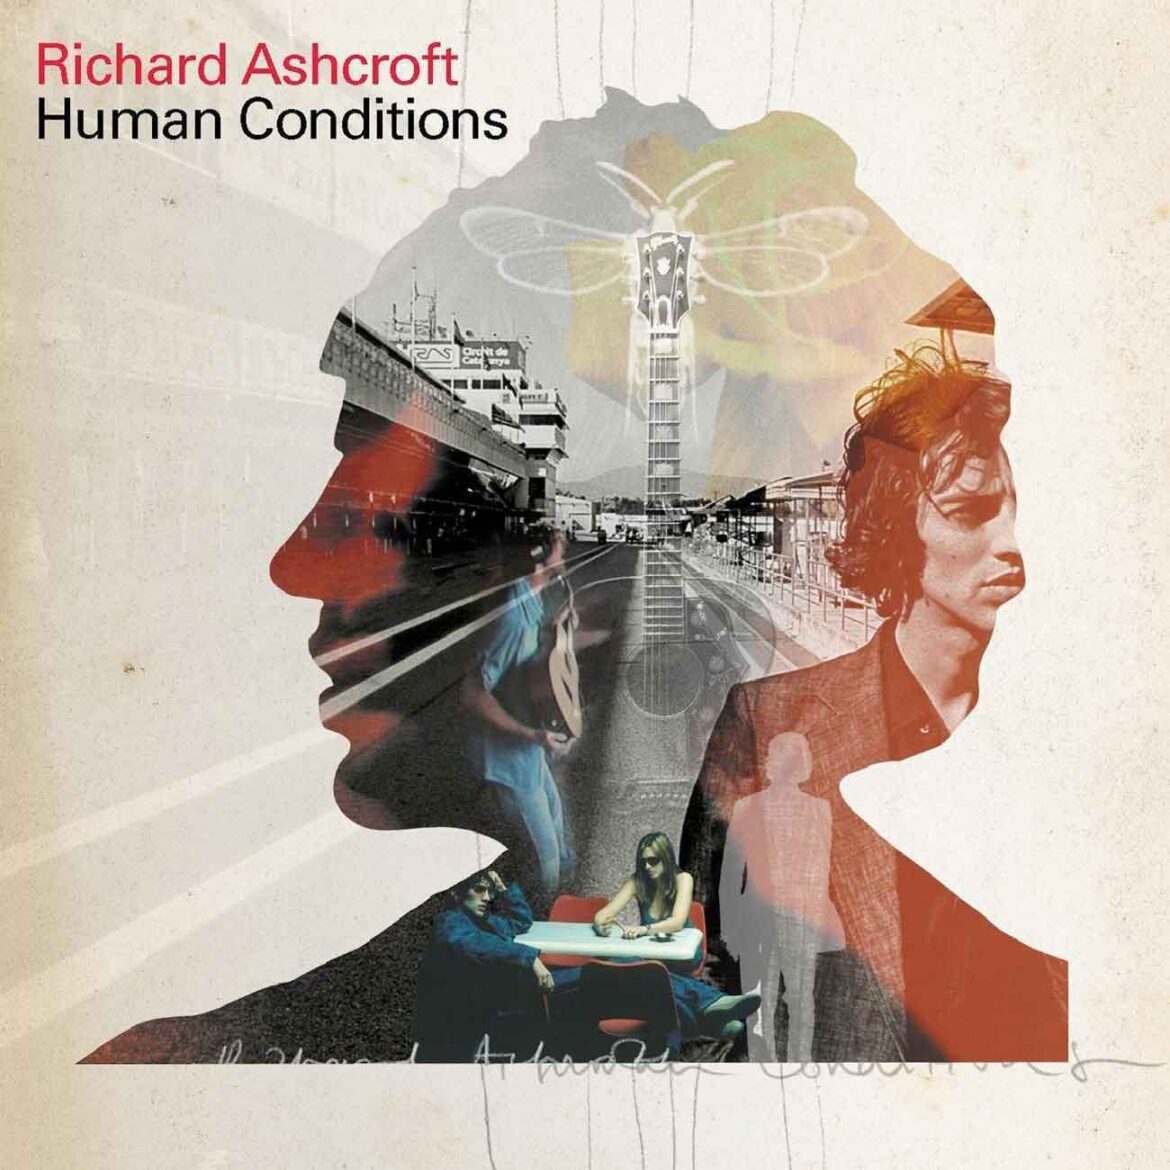 richard-ashcroft-released-“human-conditions”-20-years-ago-today